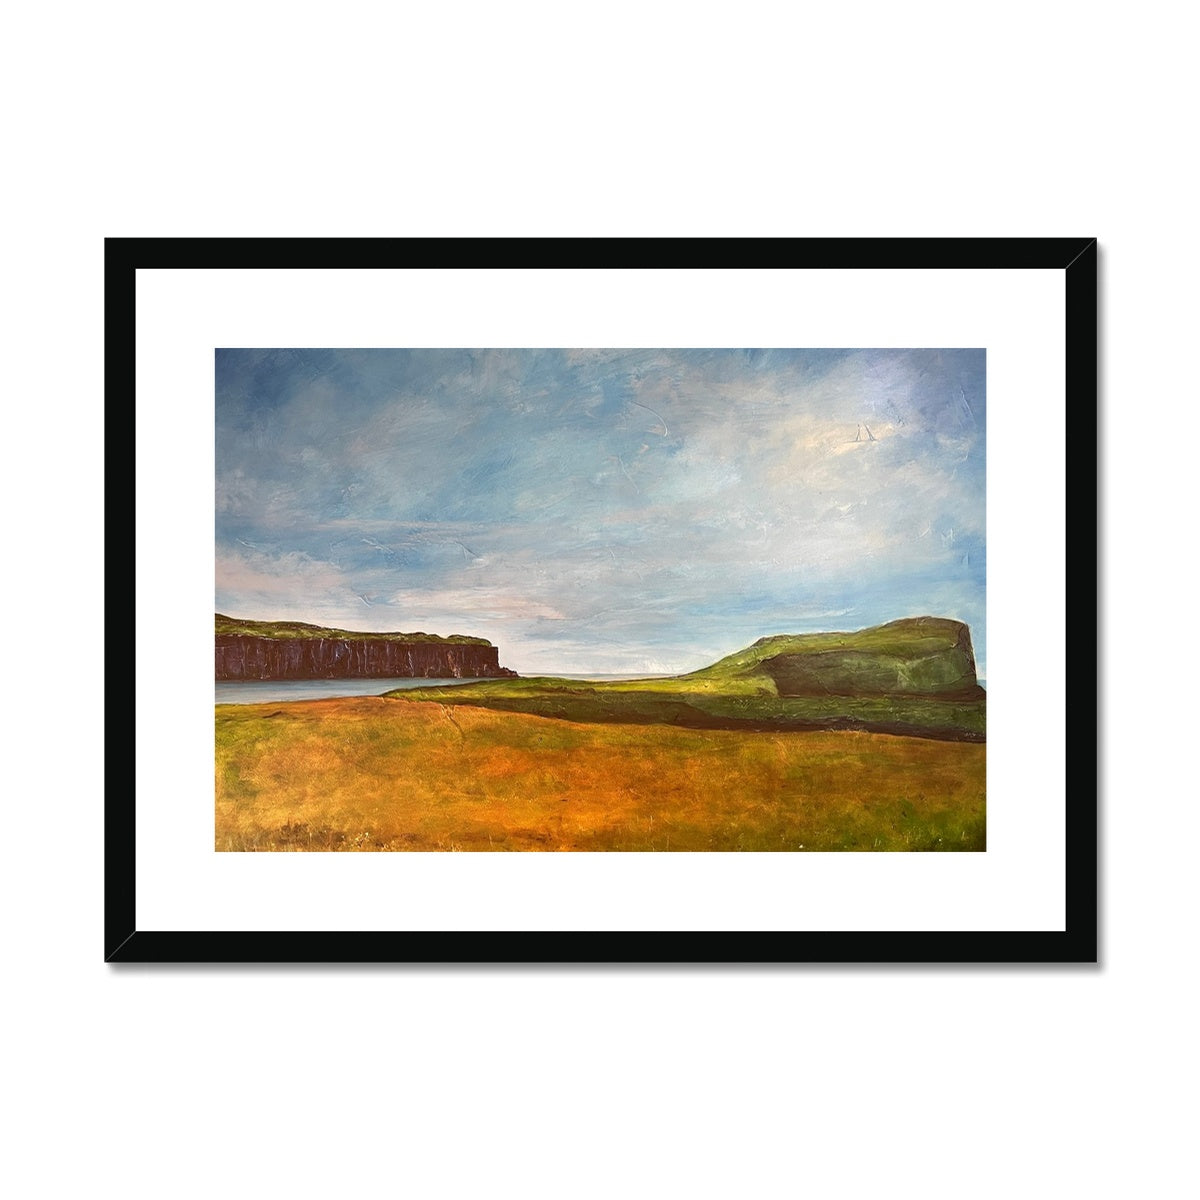 Approaching Oronsay Skye Painting | Framed & Mounted Prints From Scotland-Framed & Mounted Prints-Skye Art Gallery-A2 Landscape-Black Frame-Paintings, Prints, Homeware, Art Gifts From Scotland By Scottish Artist Kevin Hunter